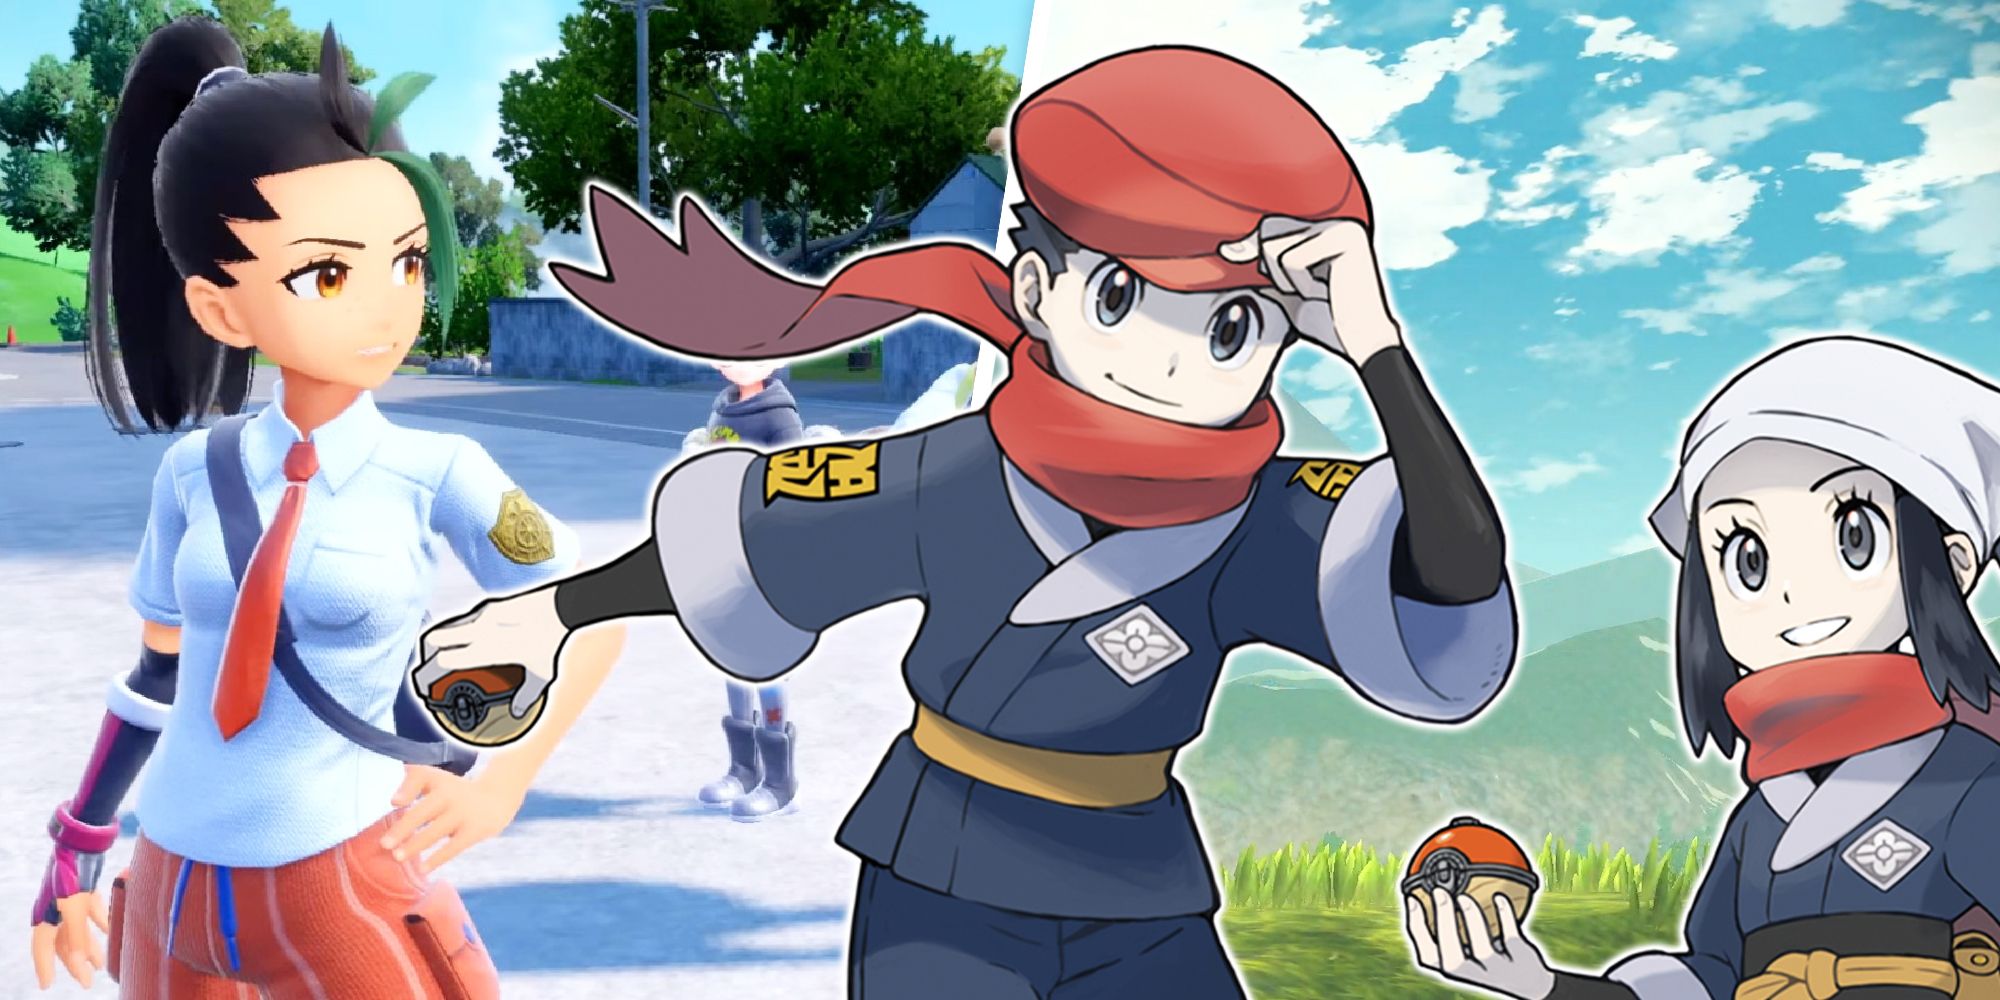 Pokemon Legends Arceus and Scarlet and Violet characters composited into the same scene